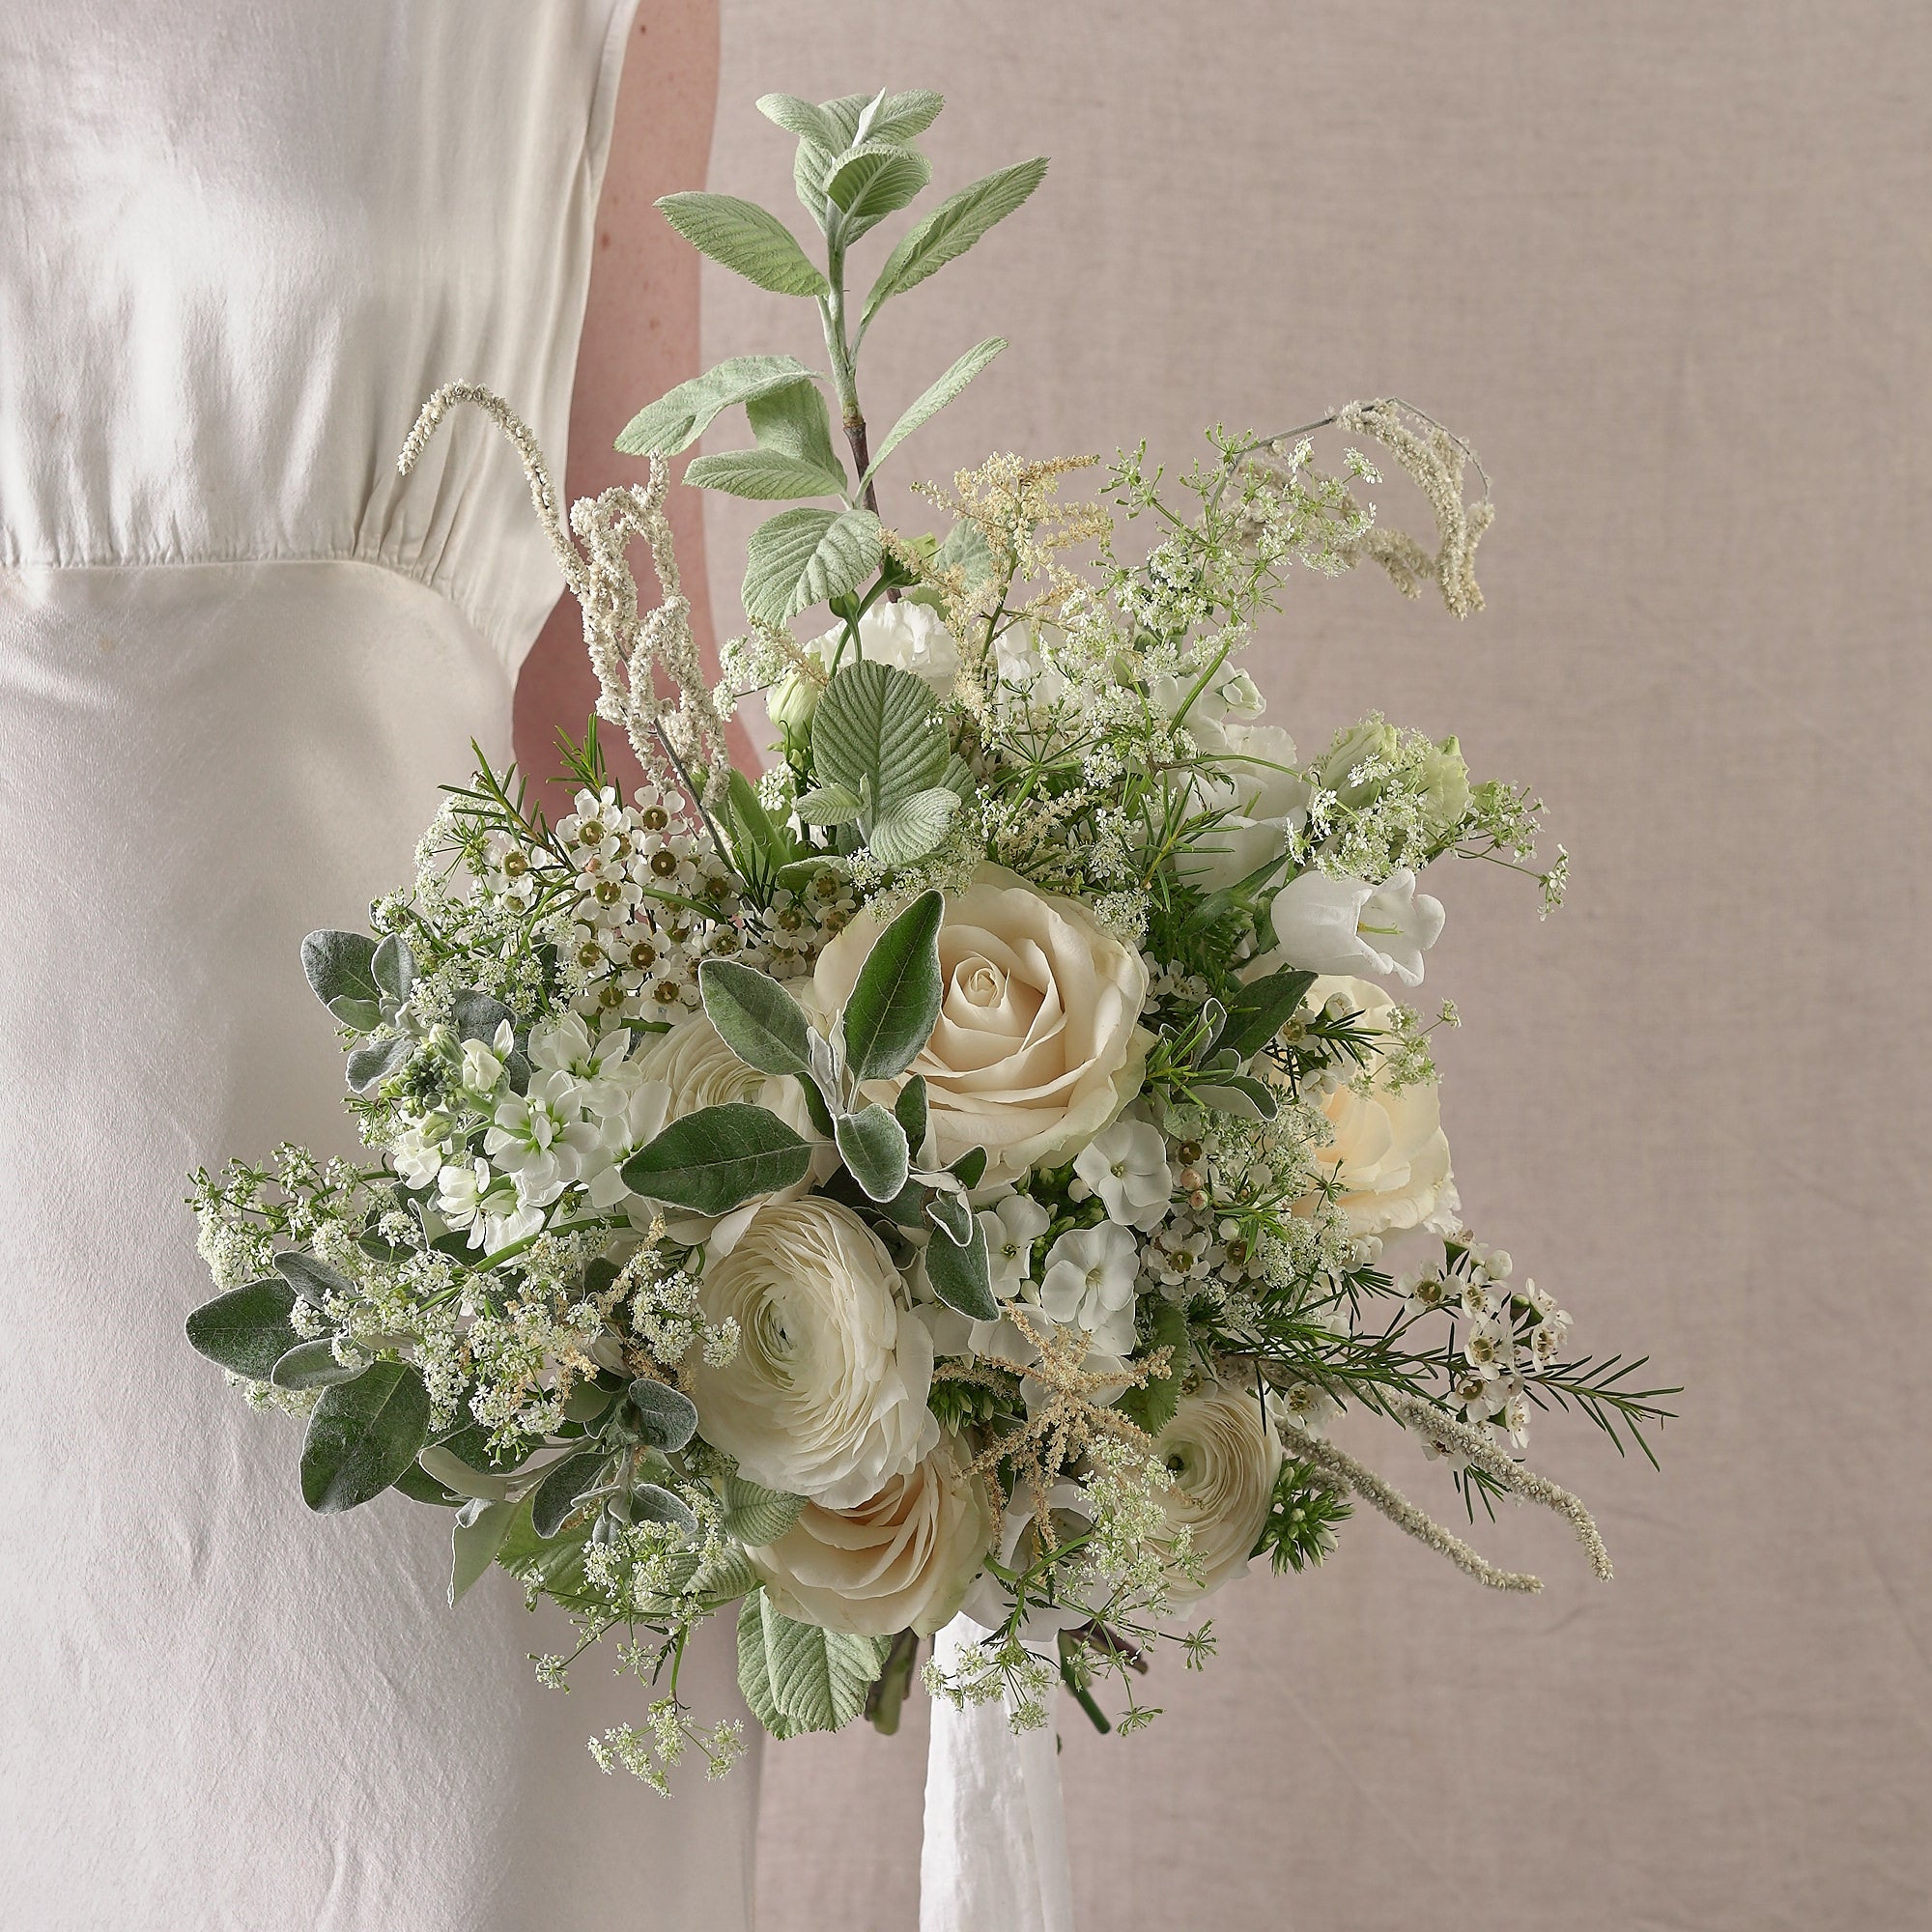 classic white bridal bouquet with white roses and fresh foliage by Botanique Workhshop London